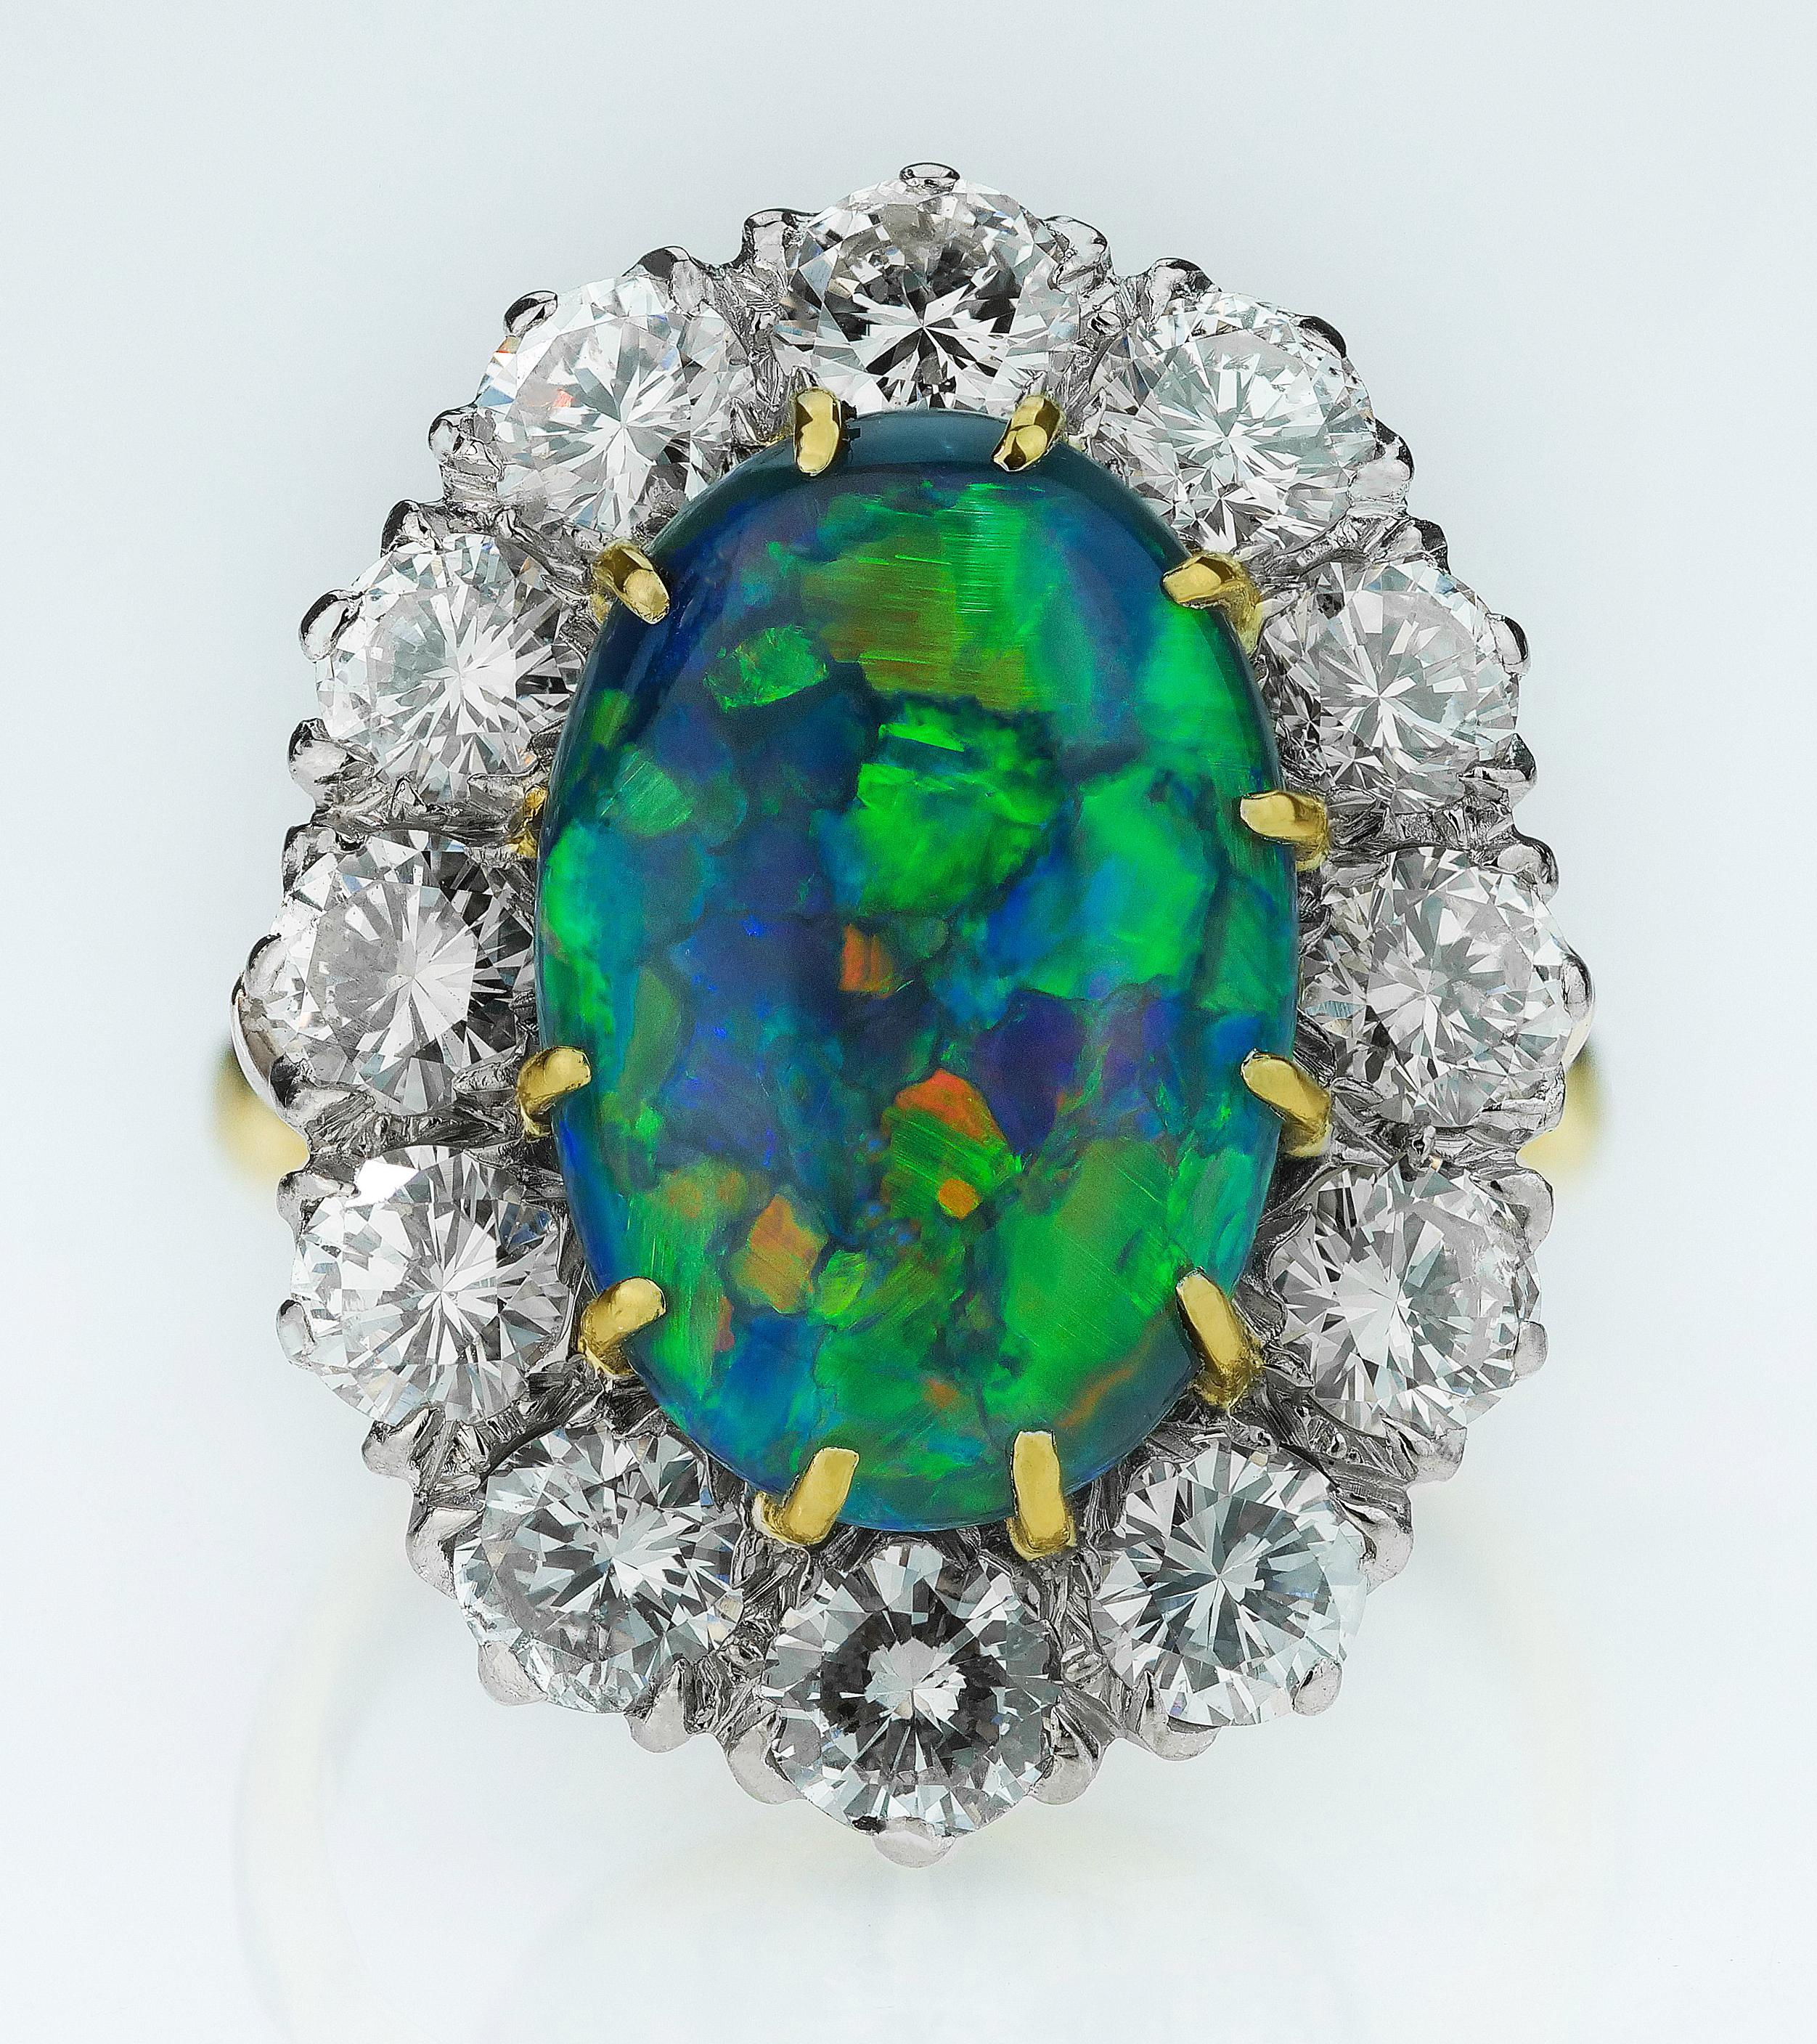 Australian black opal and diamond cluster ring in 18K white and yellow gold. Opal’s shifting play of kaleidoscopic colours is unlike any other gem. The Romans thought it was the most precious and powerful of all. 
1 x Cabochon black opal,